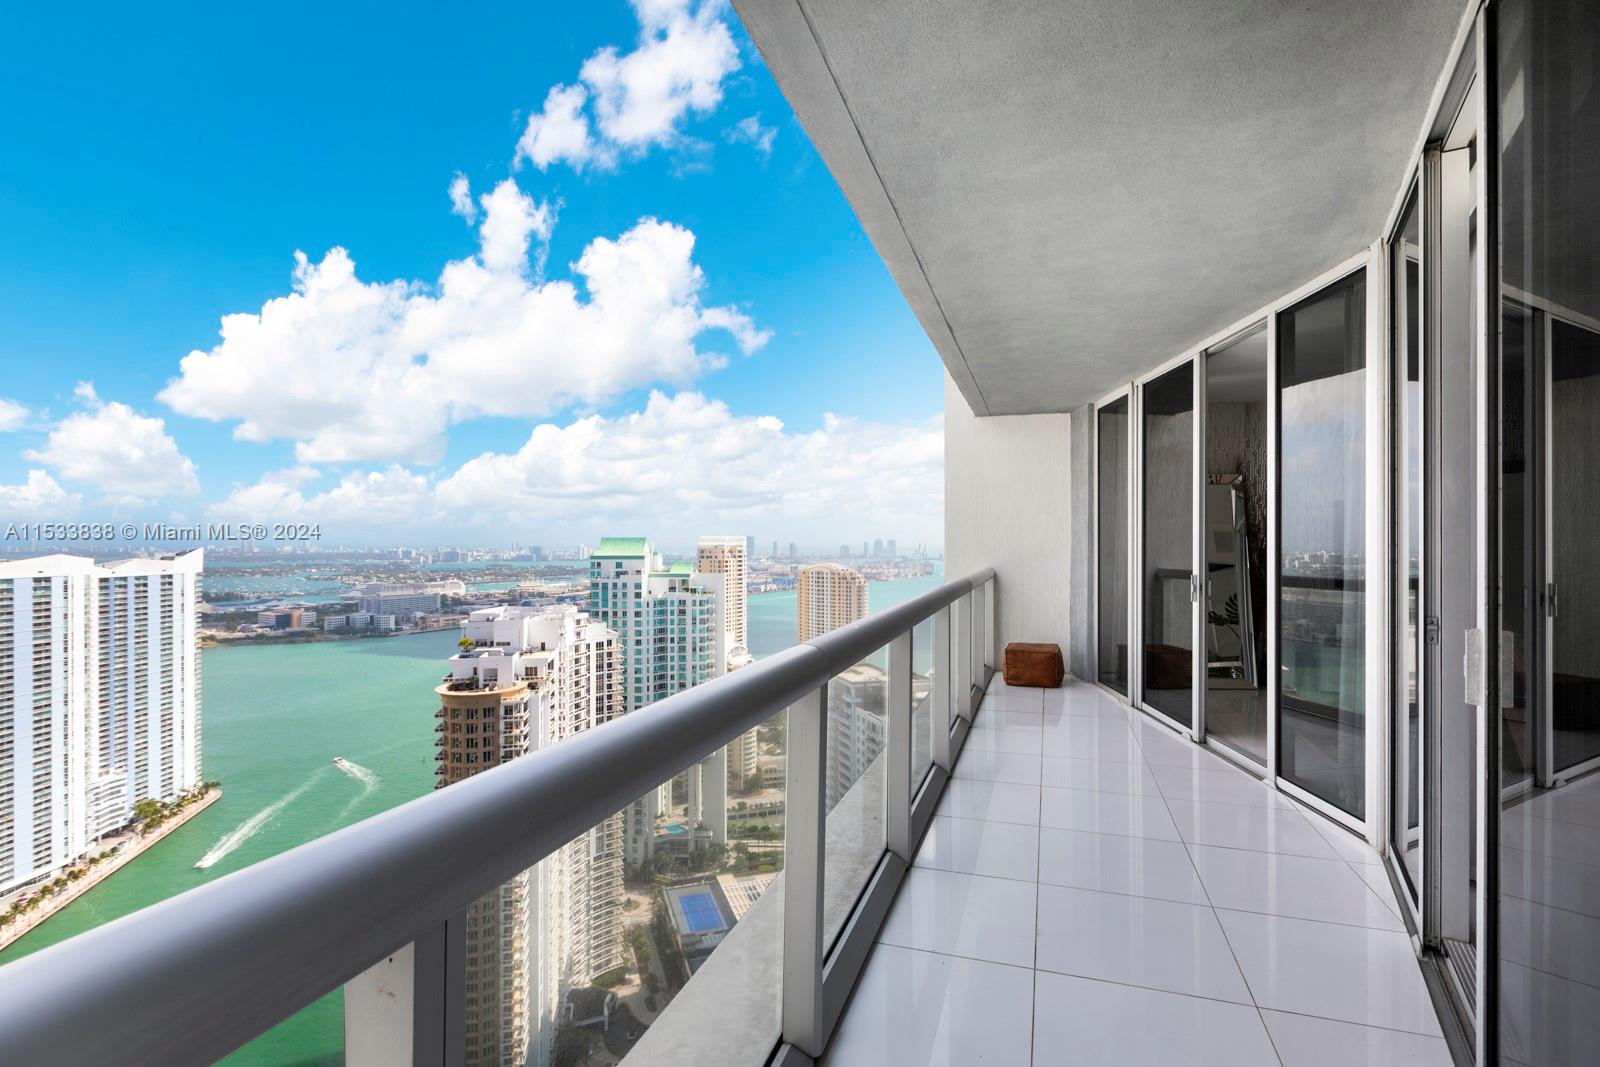 High floor 1 bedroom unit with enviable intercoastal views surpassing buildings on Brickell Key, white tile flooring throughout, custom wallpaper in living area and bathroom. Unmatched amenities include: 2 Restaurants including world famous Italian eatery Cipriani, Mexican cuisine from La Cantina No. 20, a 300-foot long swimming pool, 50-person hot tub, 28,000 square foot spa and fitness center, 2 parks, market, movie theater, game room, café with poolside food and beverage service, lobby cafe, poolside towel service, 24-hour full-service concierge, and 24-hour valet parking.